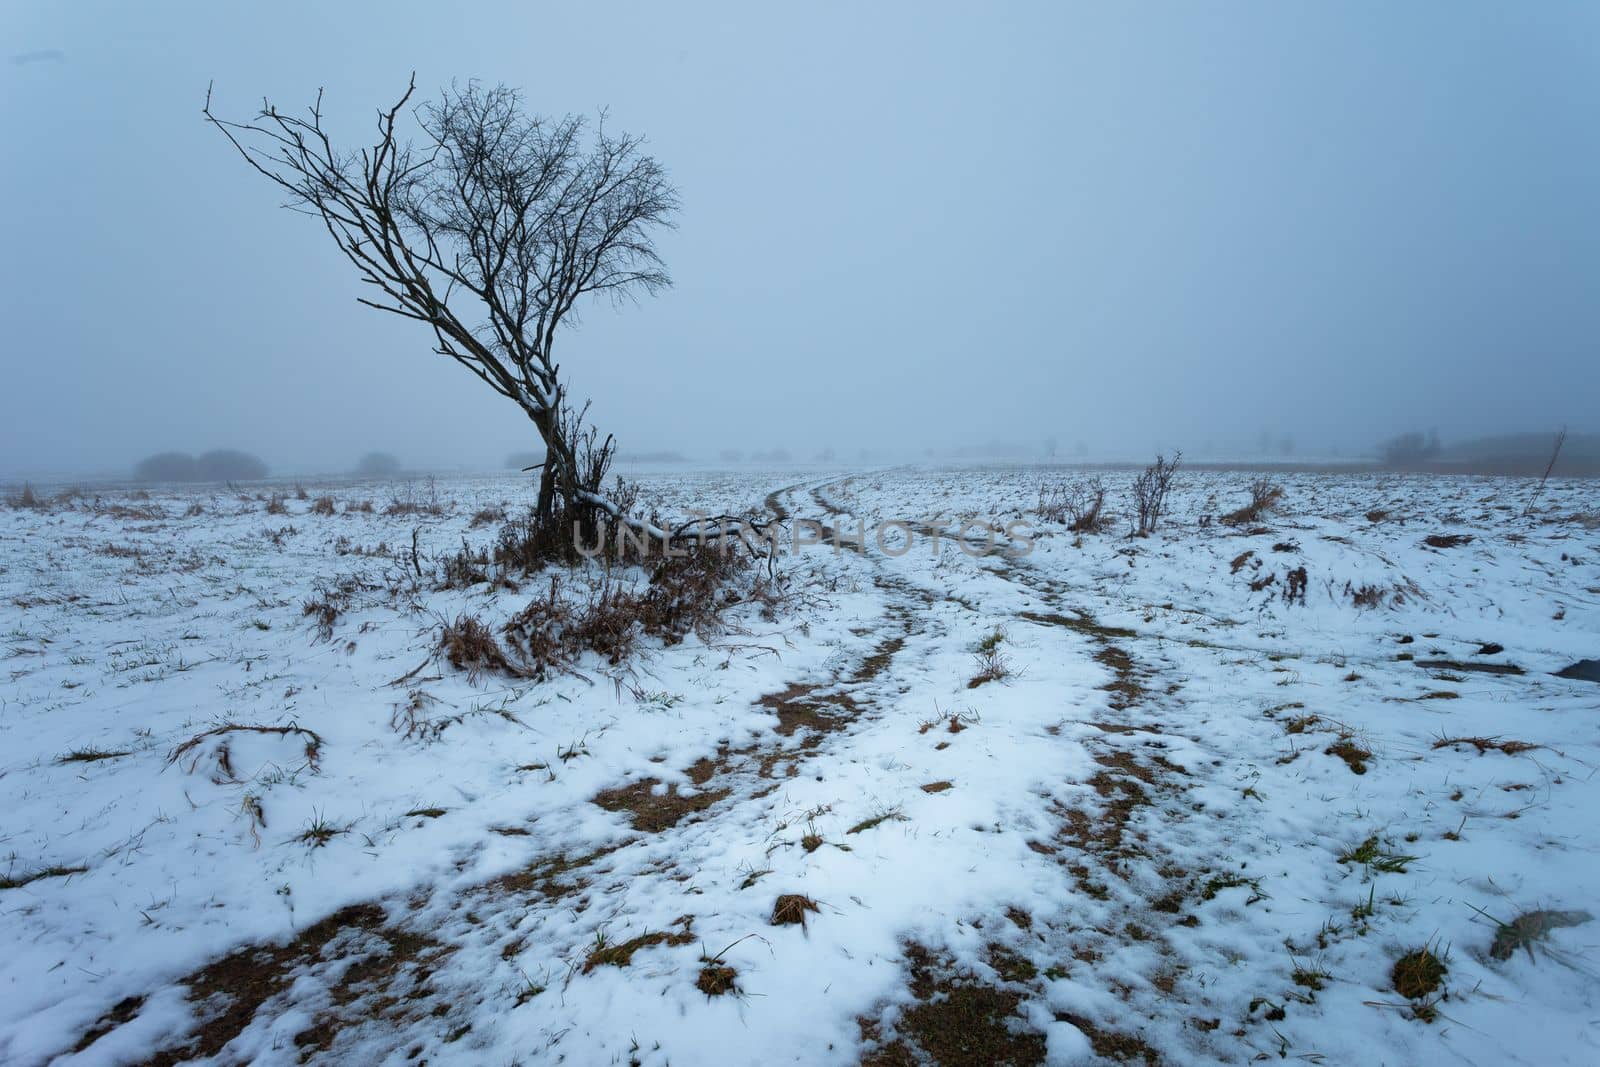 A tree by a dirt road, a view on a foggy winter day, Czulczyce, Poland